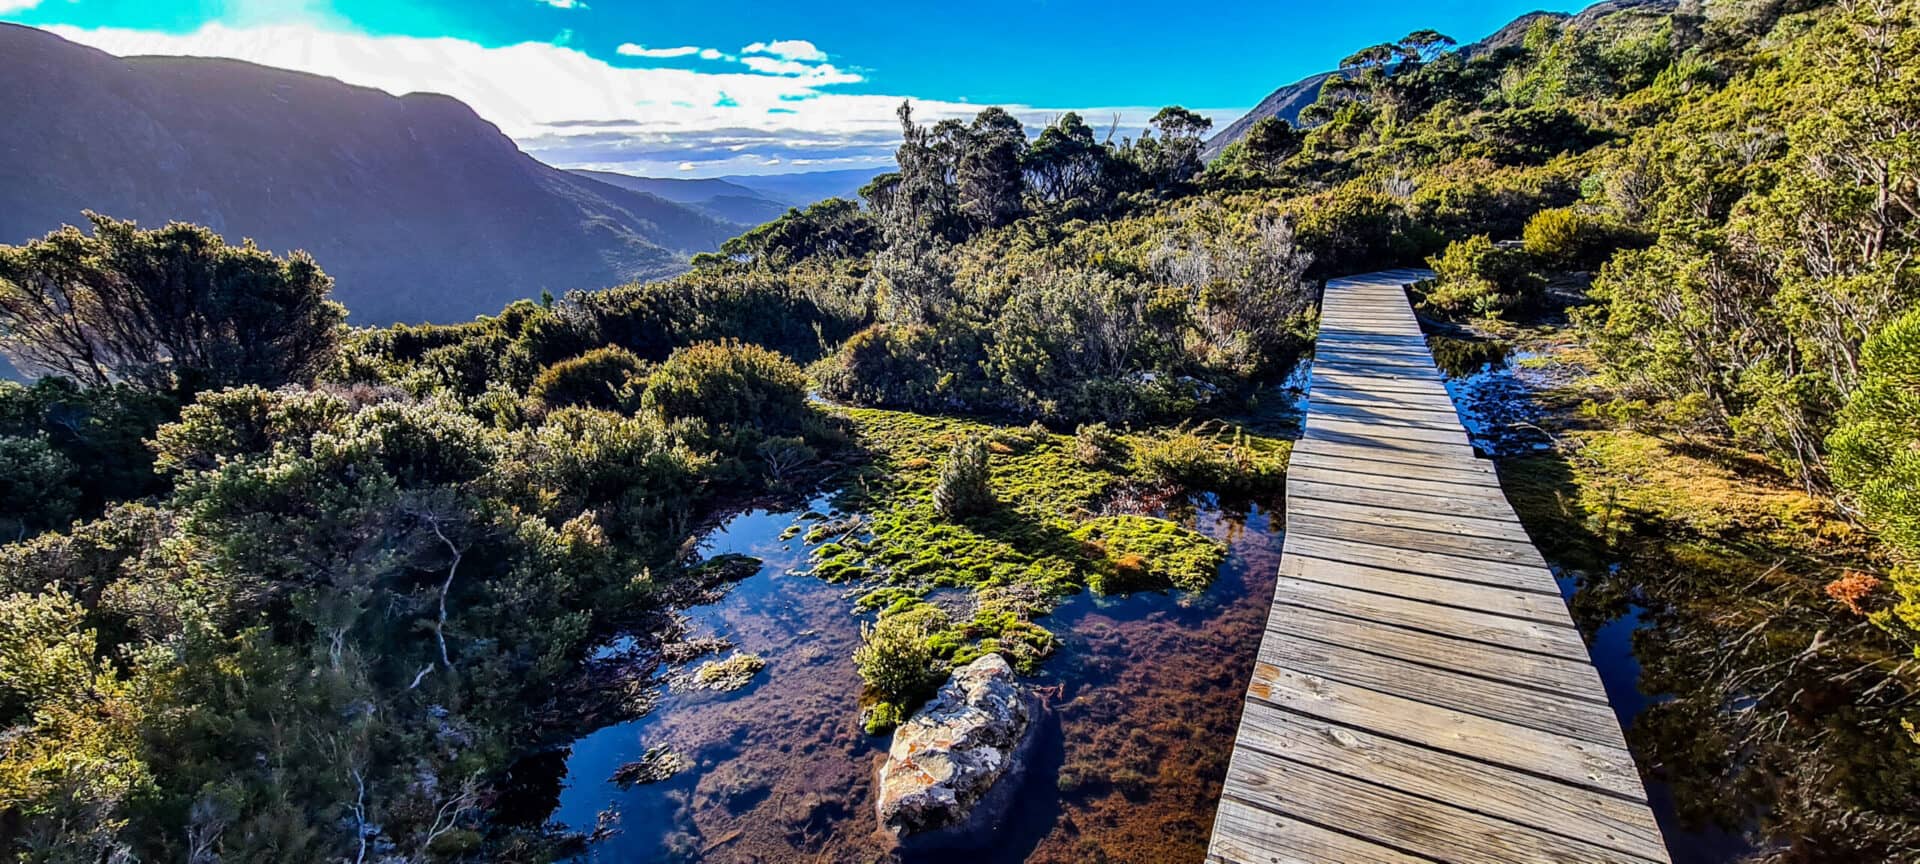 Wooden Boardwalk with puddles of water on the sides